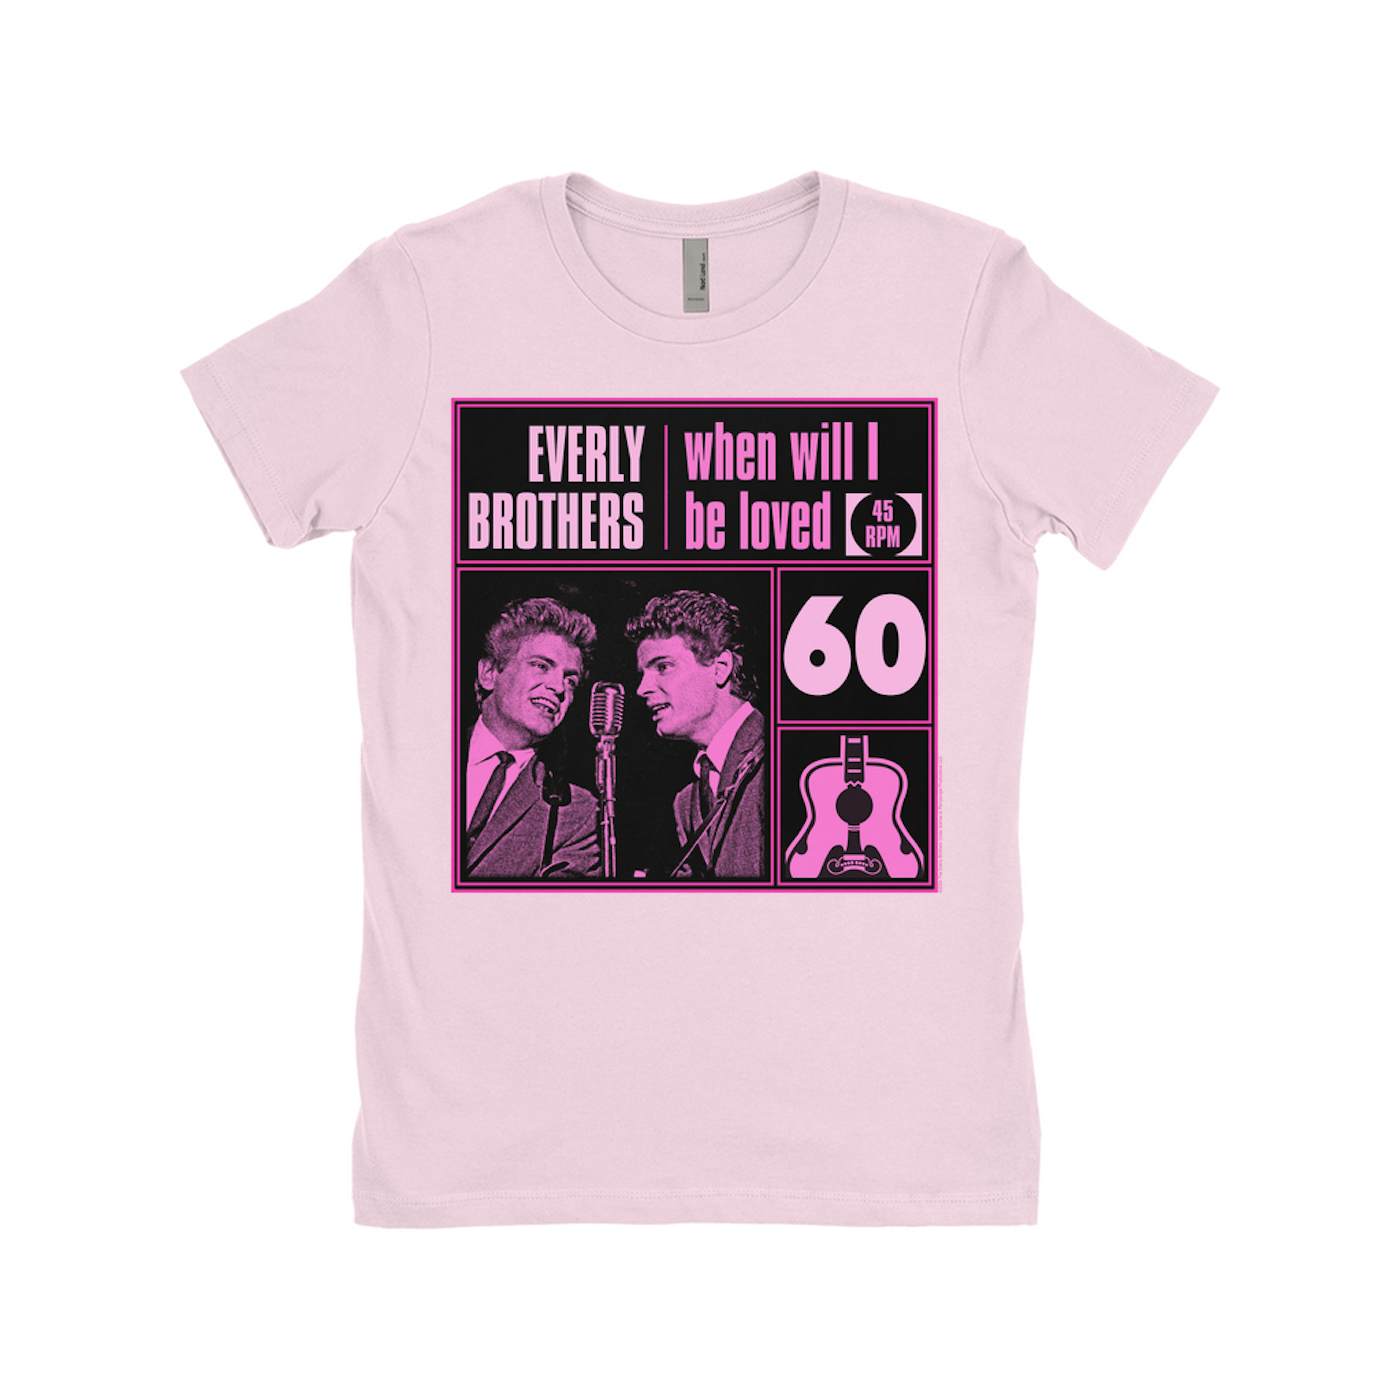 The Everly Brothers Ladies' Boyfriend T-Shirt | When Will I Be Loved Pink Black The Everly Brothers Shirt